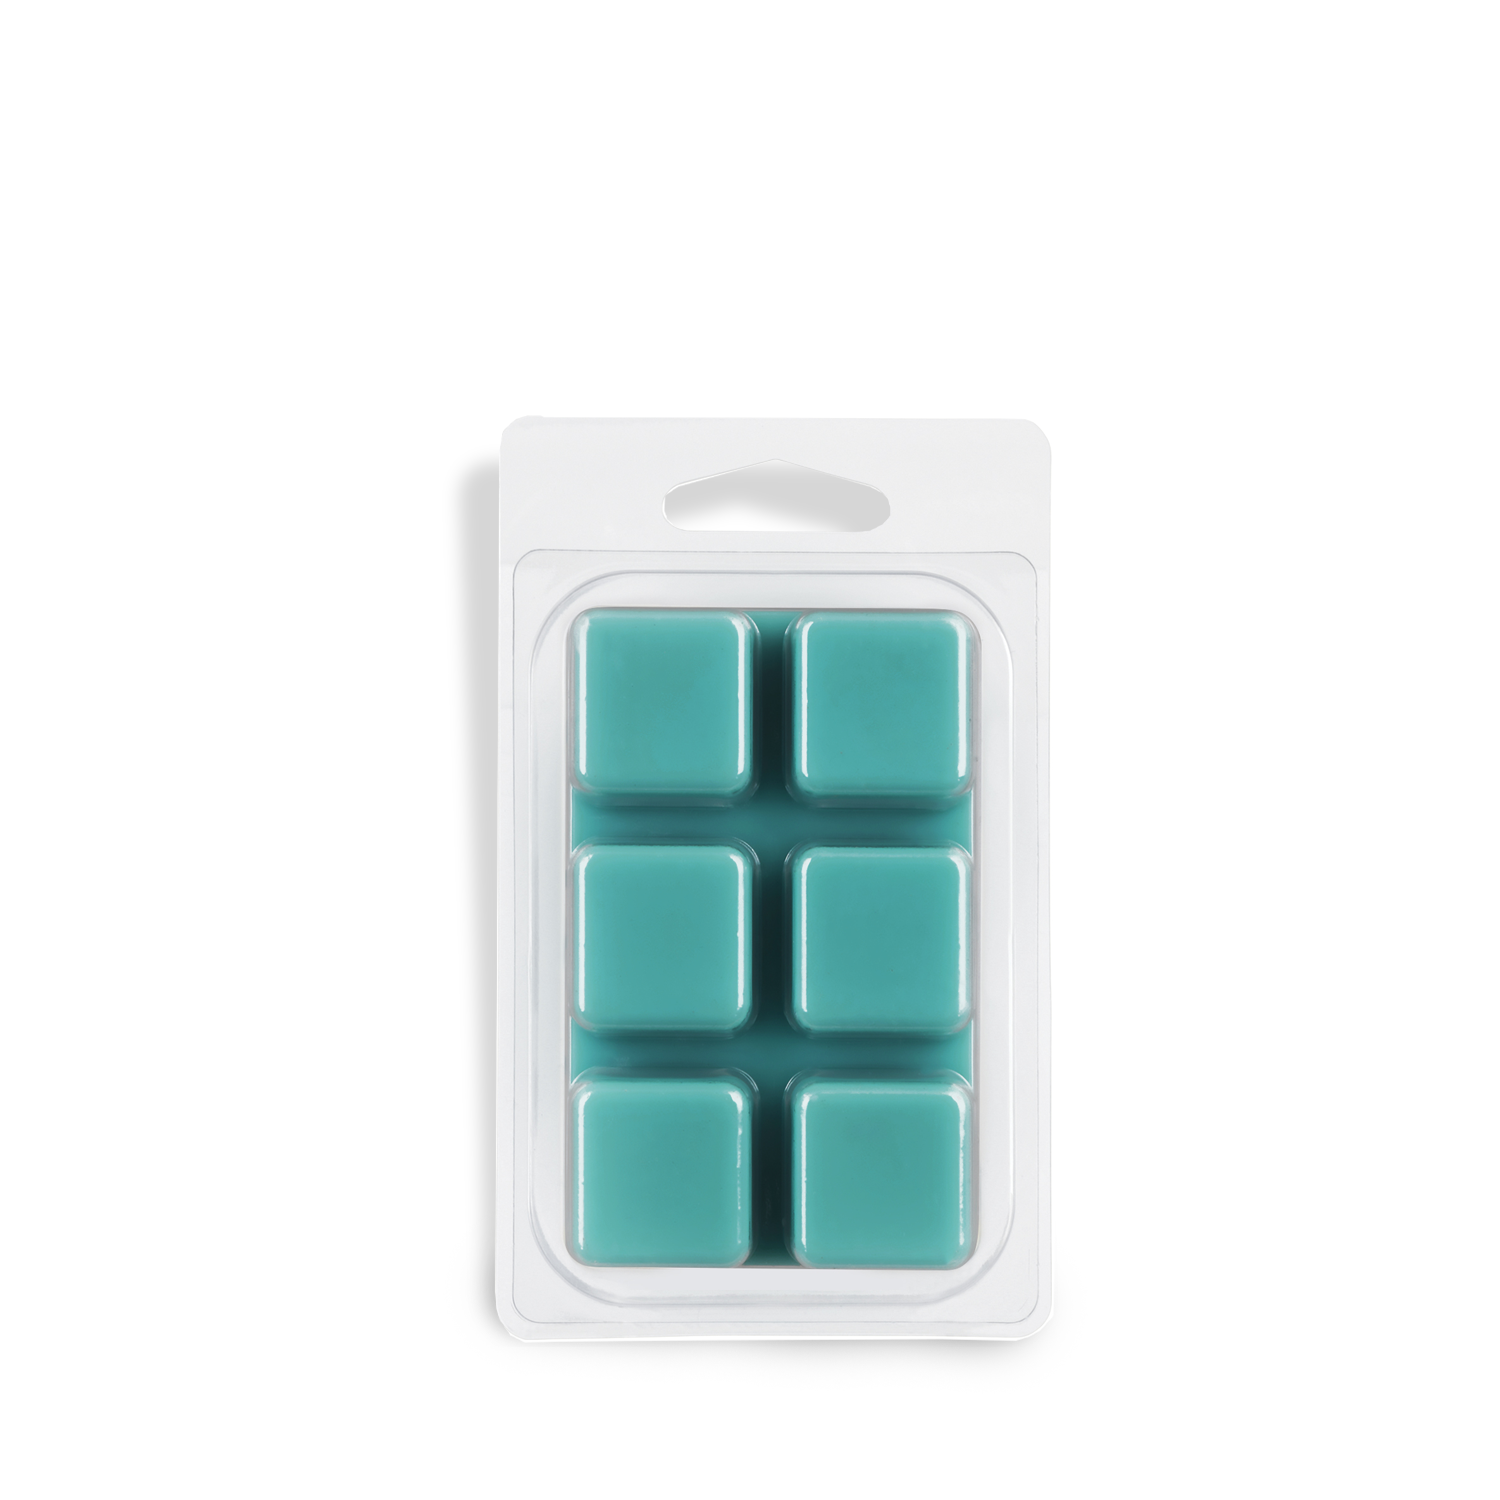 A pack of Paradise Isle scented squares in a package scented with jasmine wax melt by Tuscany Candle® SEASONAL.